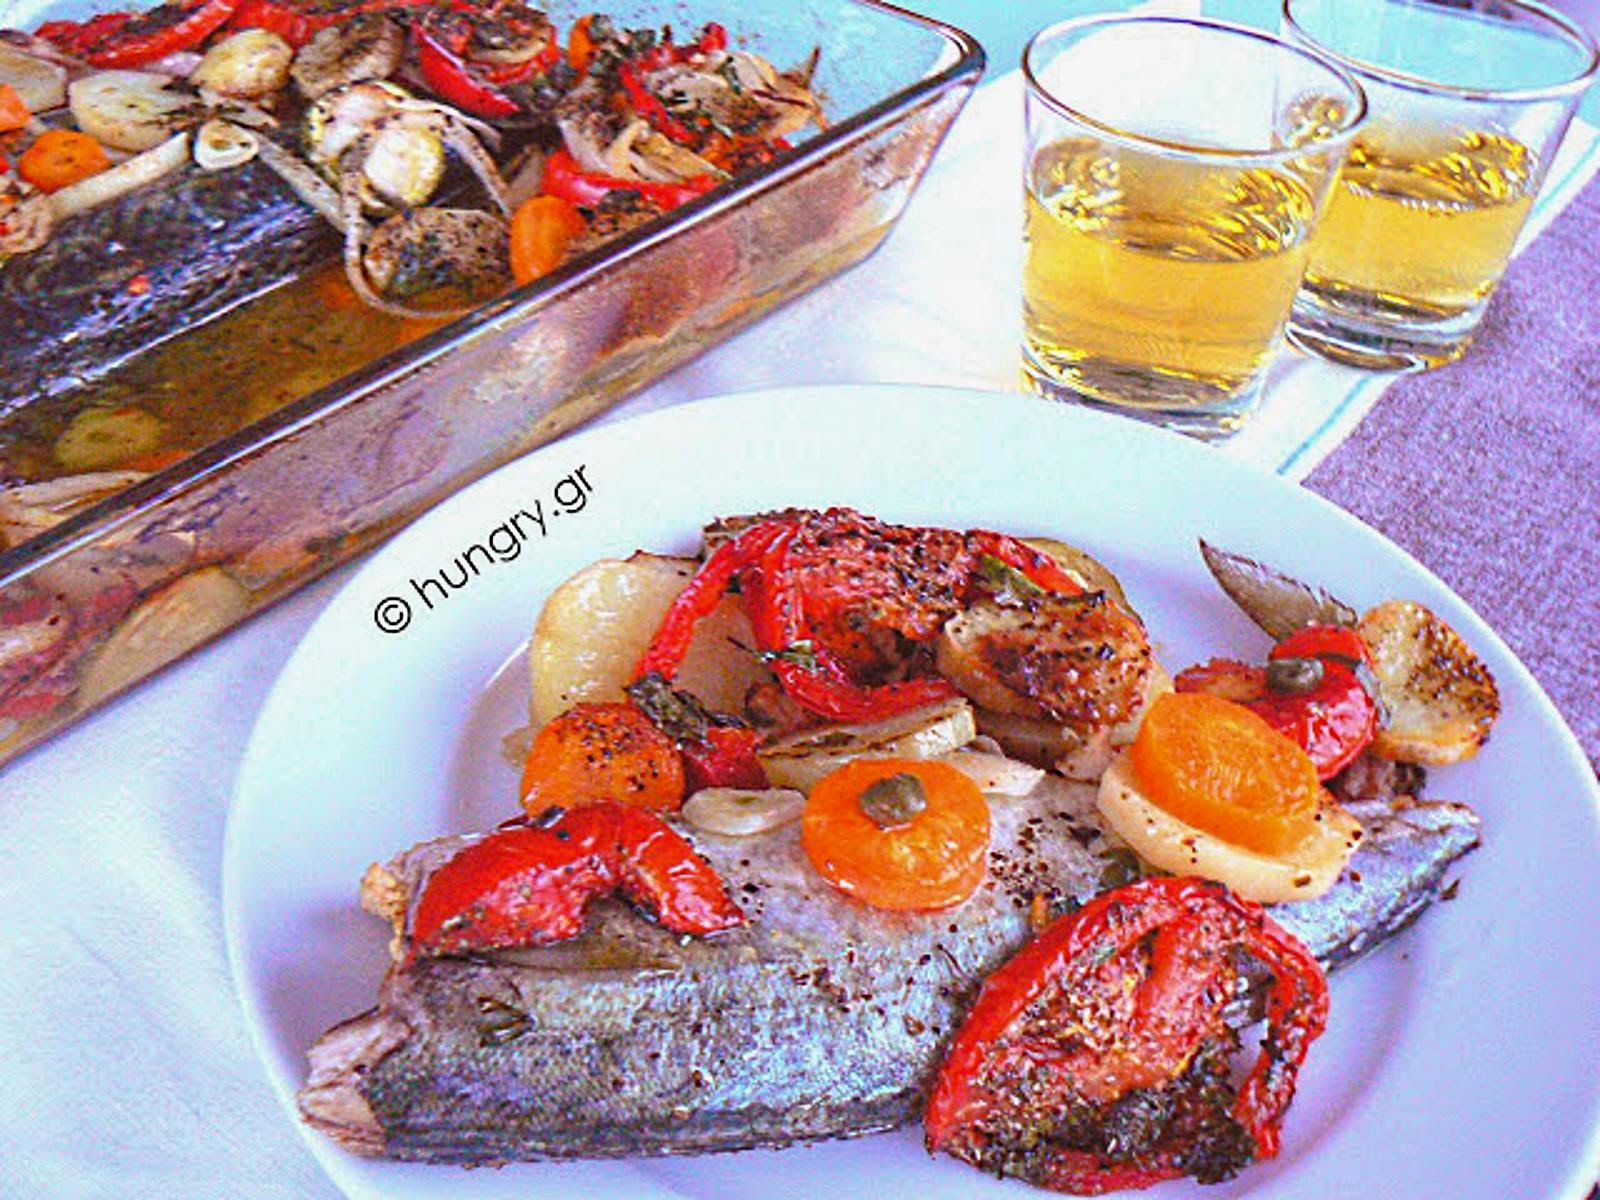 Oven Baked Mackerel with Vegetables